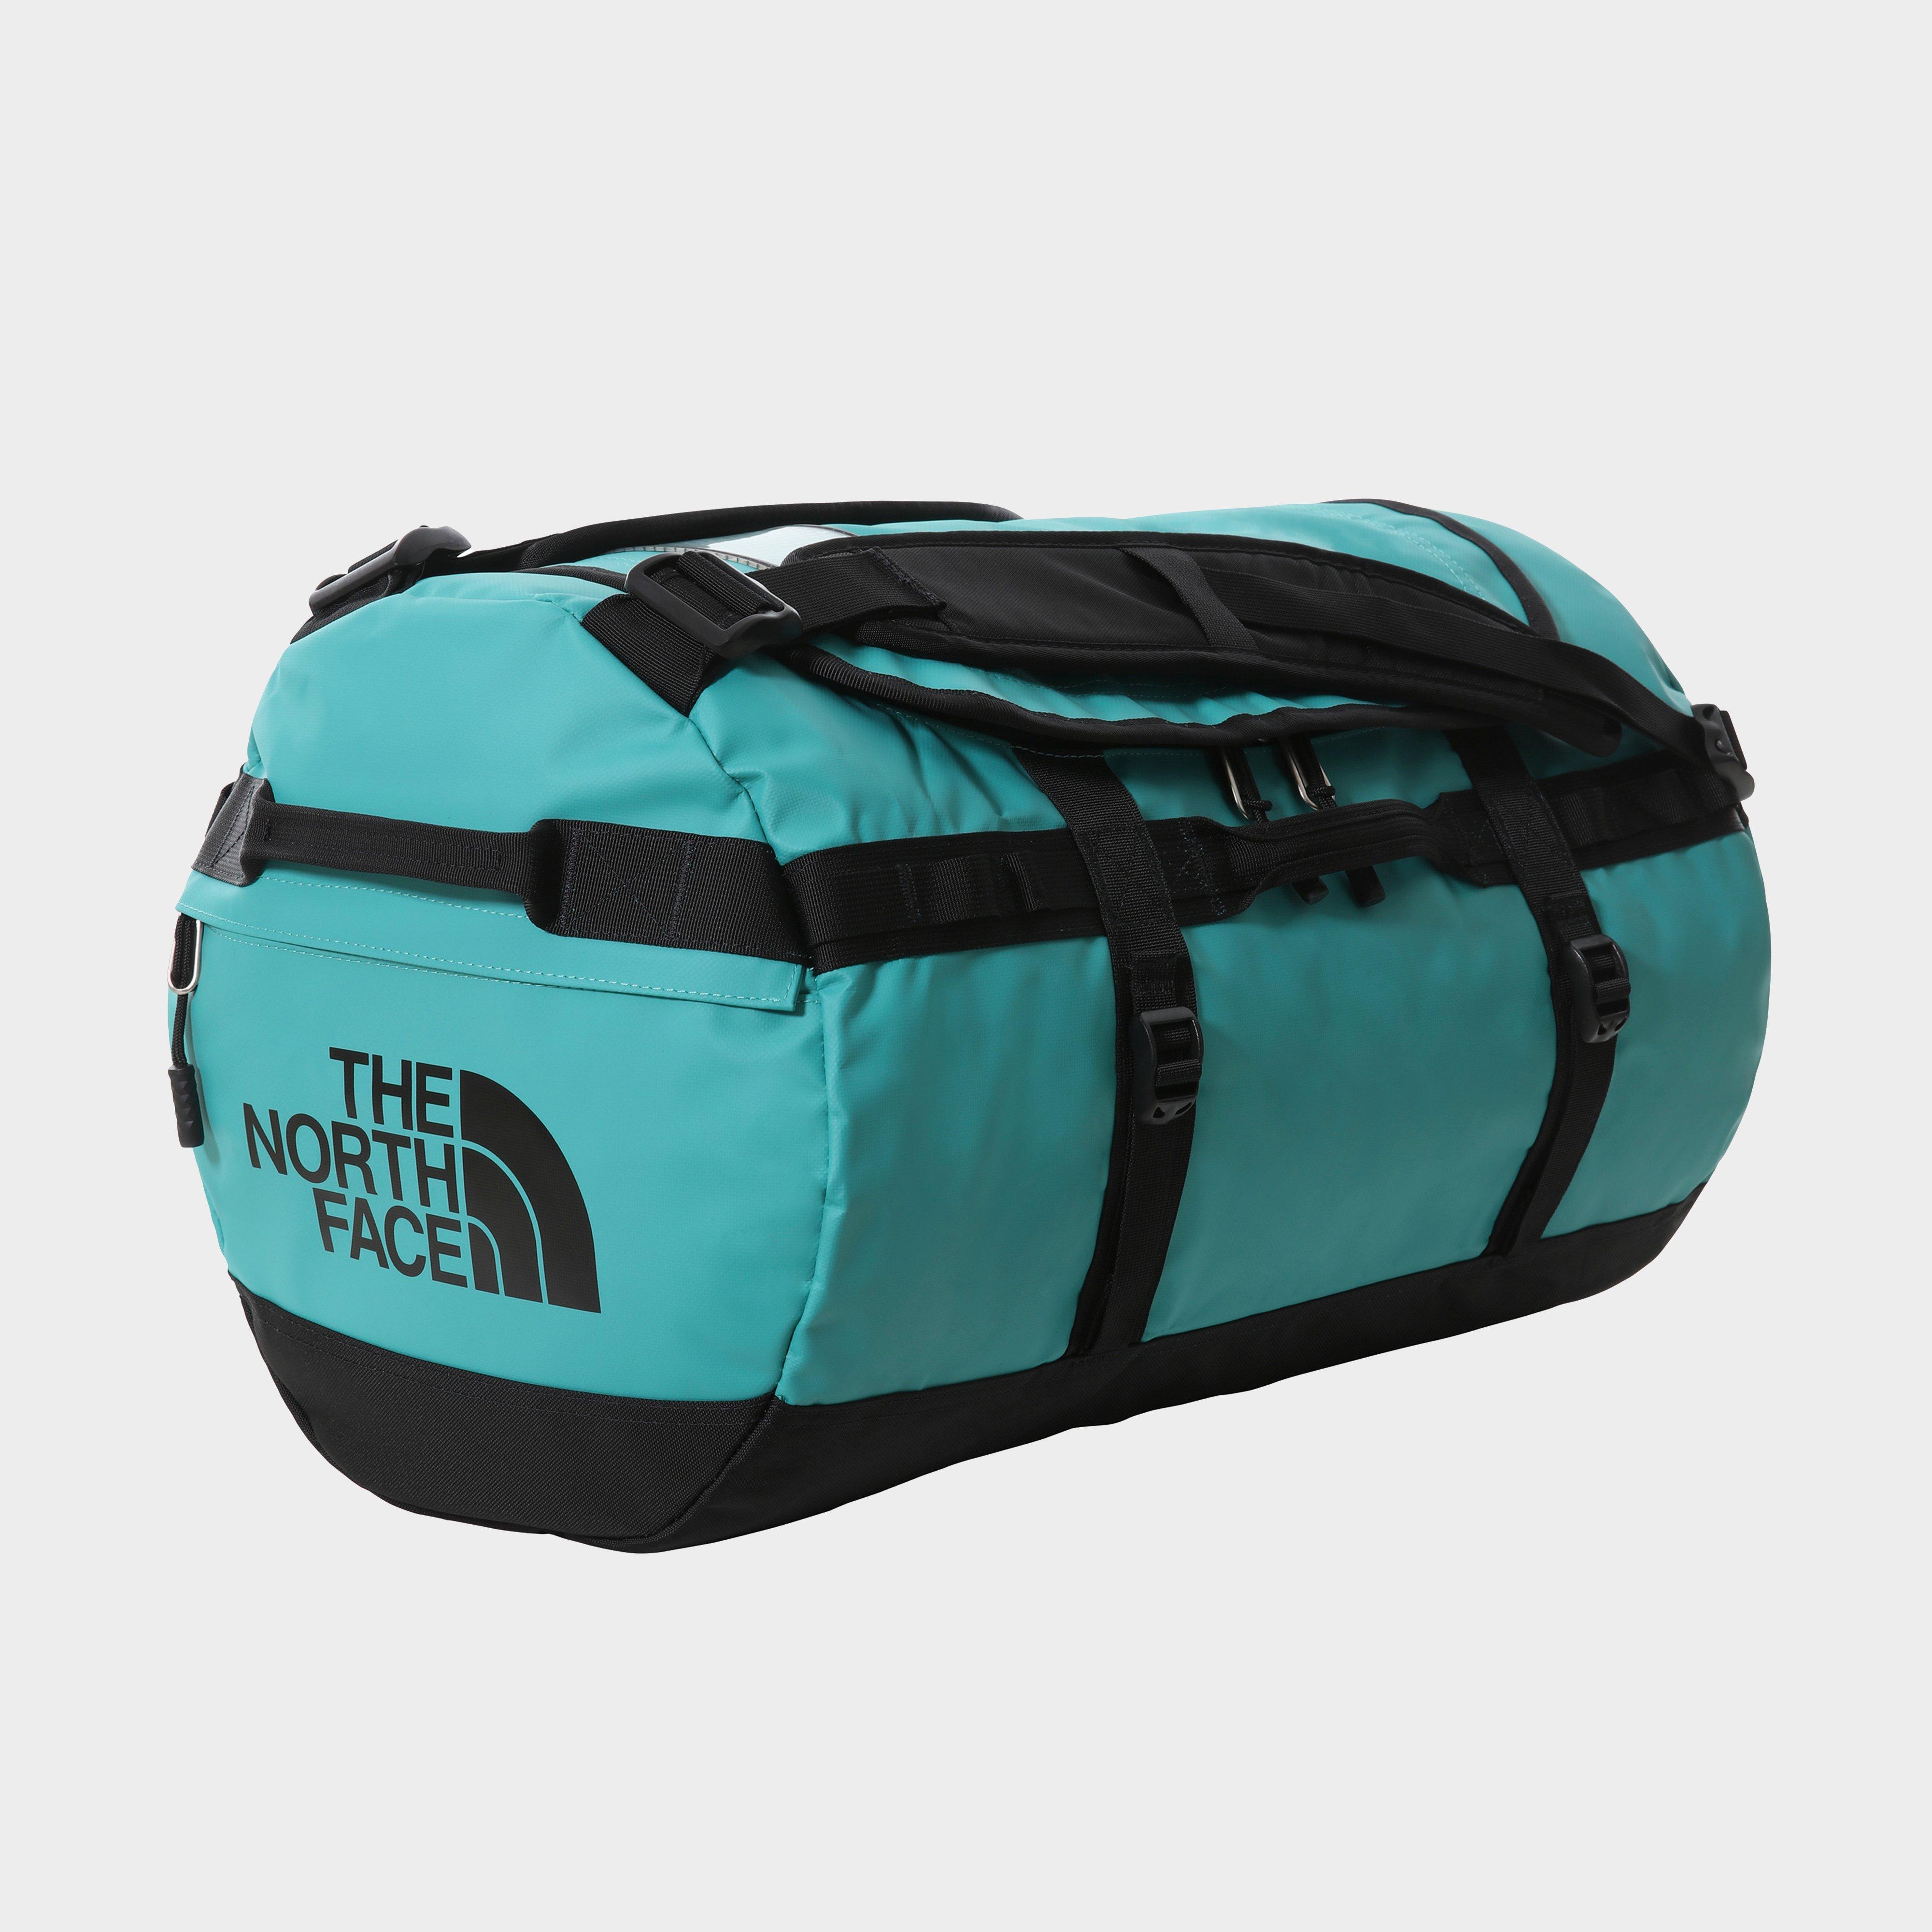 The North Face Base Camp Duffel Small - Green/black  Green/black